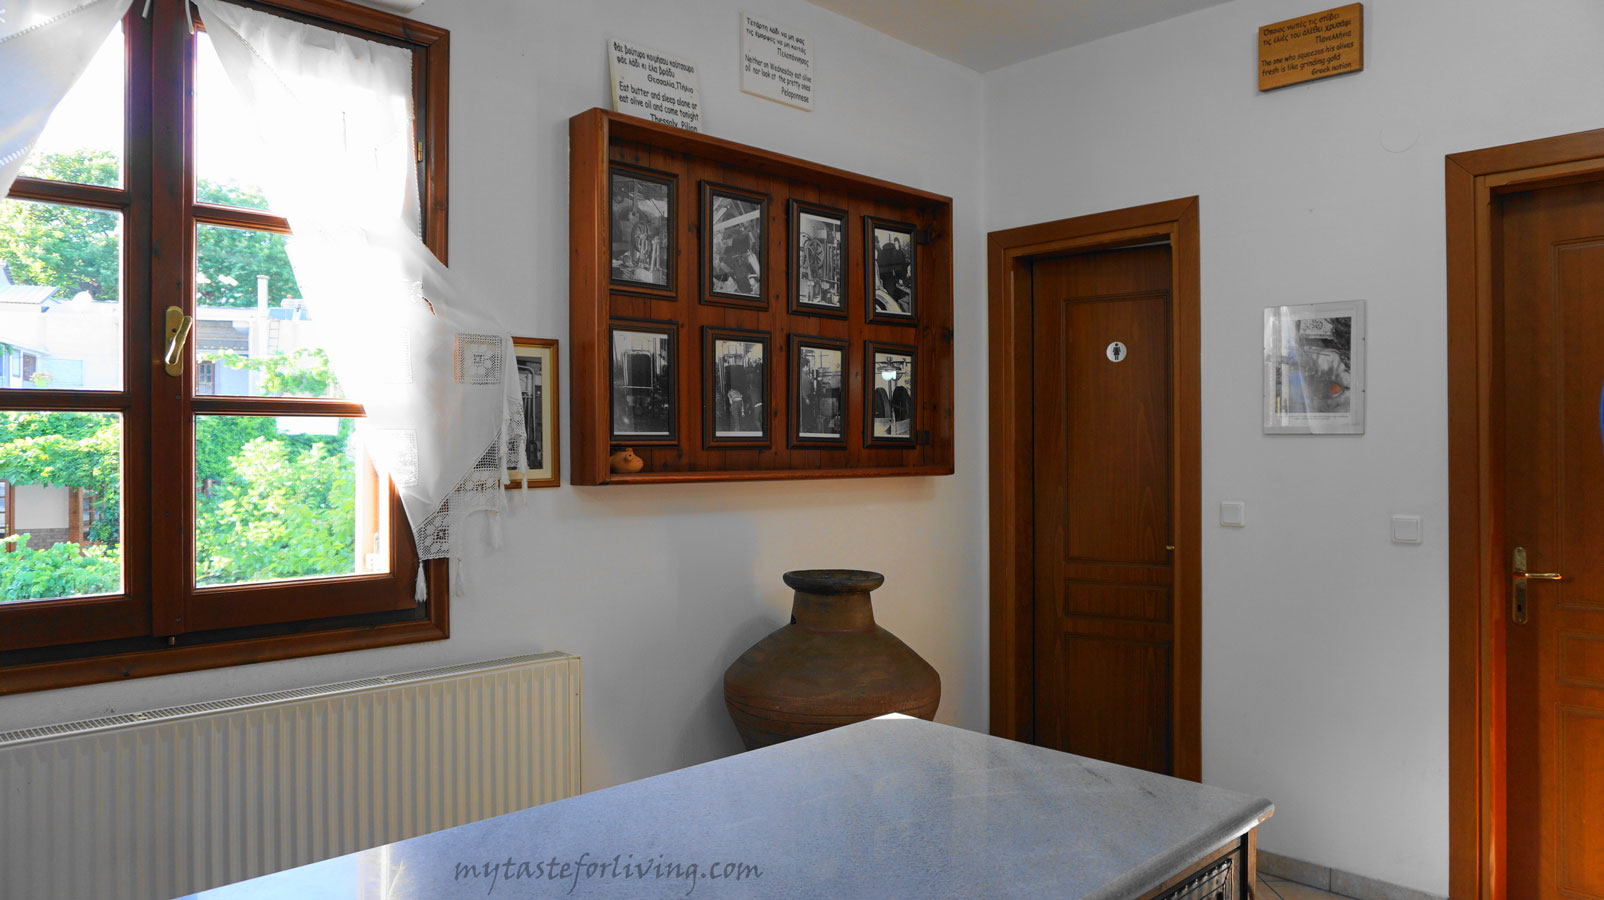 The olive oil museum of the Sotirelis family is a place that we do not miss to visit when we are on the island of Thassos, Greece. It is located in the mountain village of Panagia, a small and pleasant place, suitable for walks.